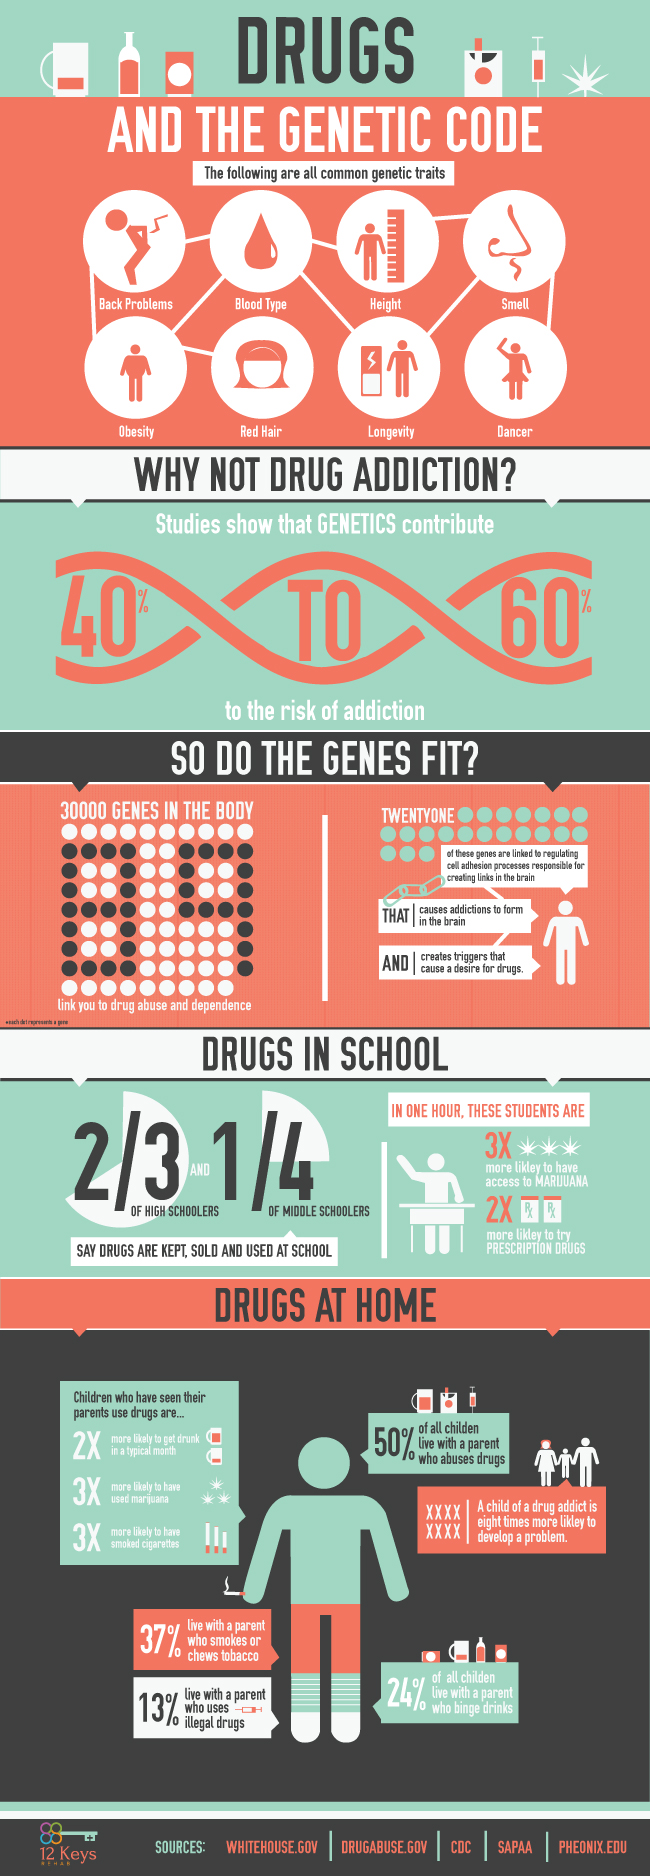 Drugs and the Genetic Code